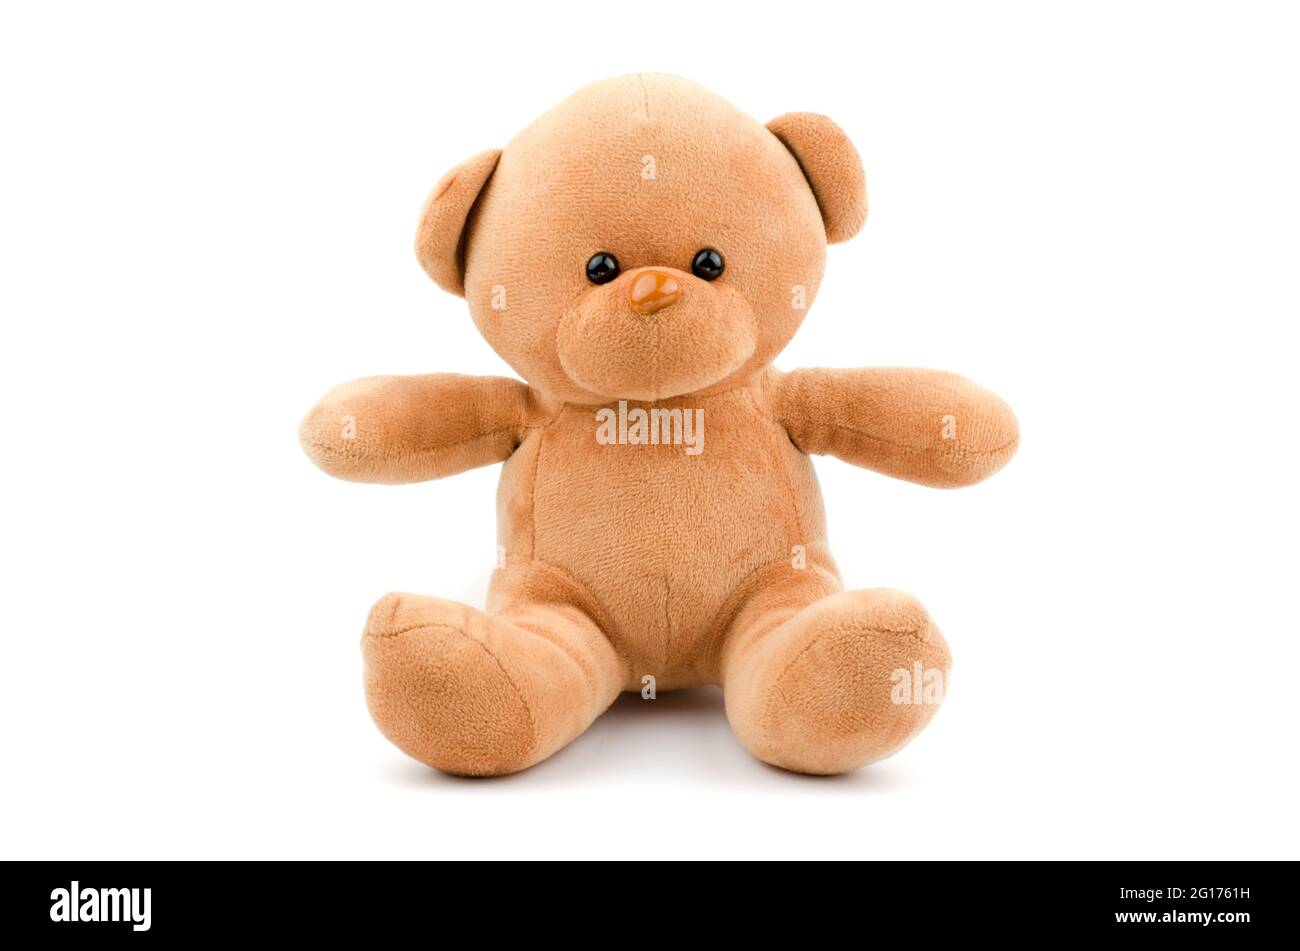 Brown teddy bear on a white background, isolate. Children's soft toy Stock Photo